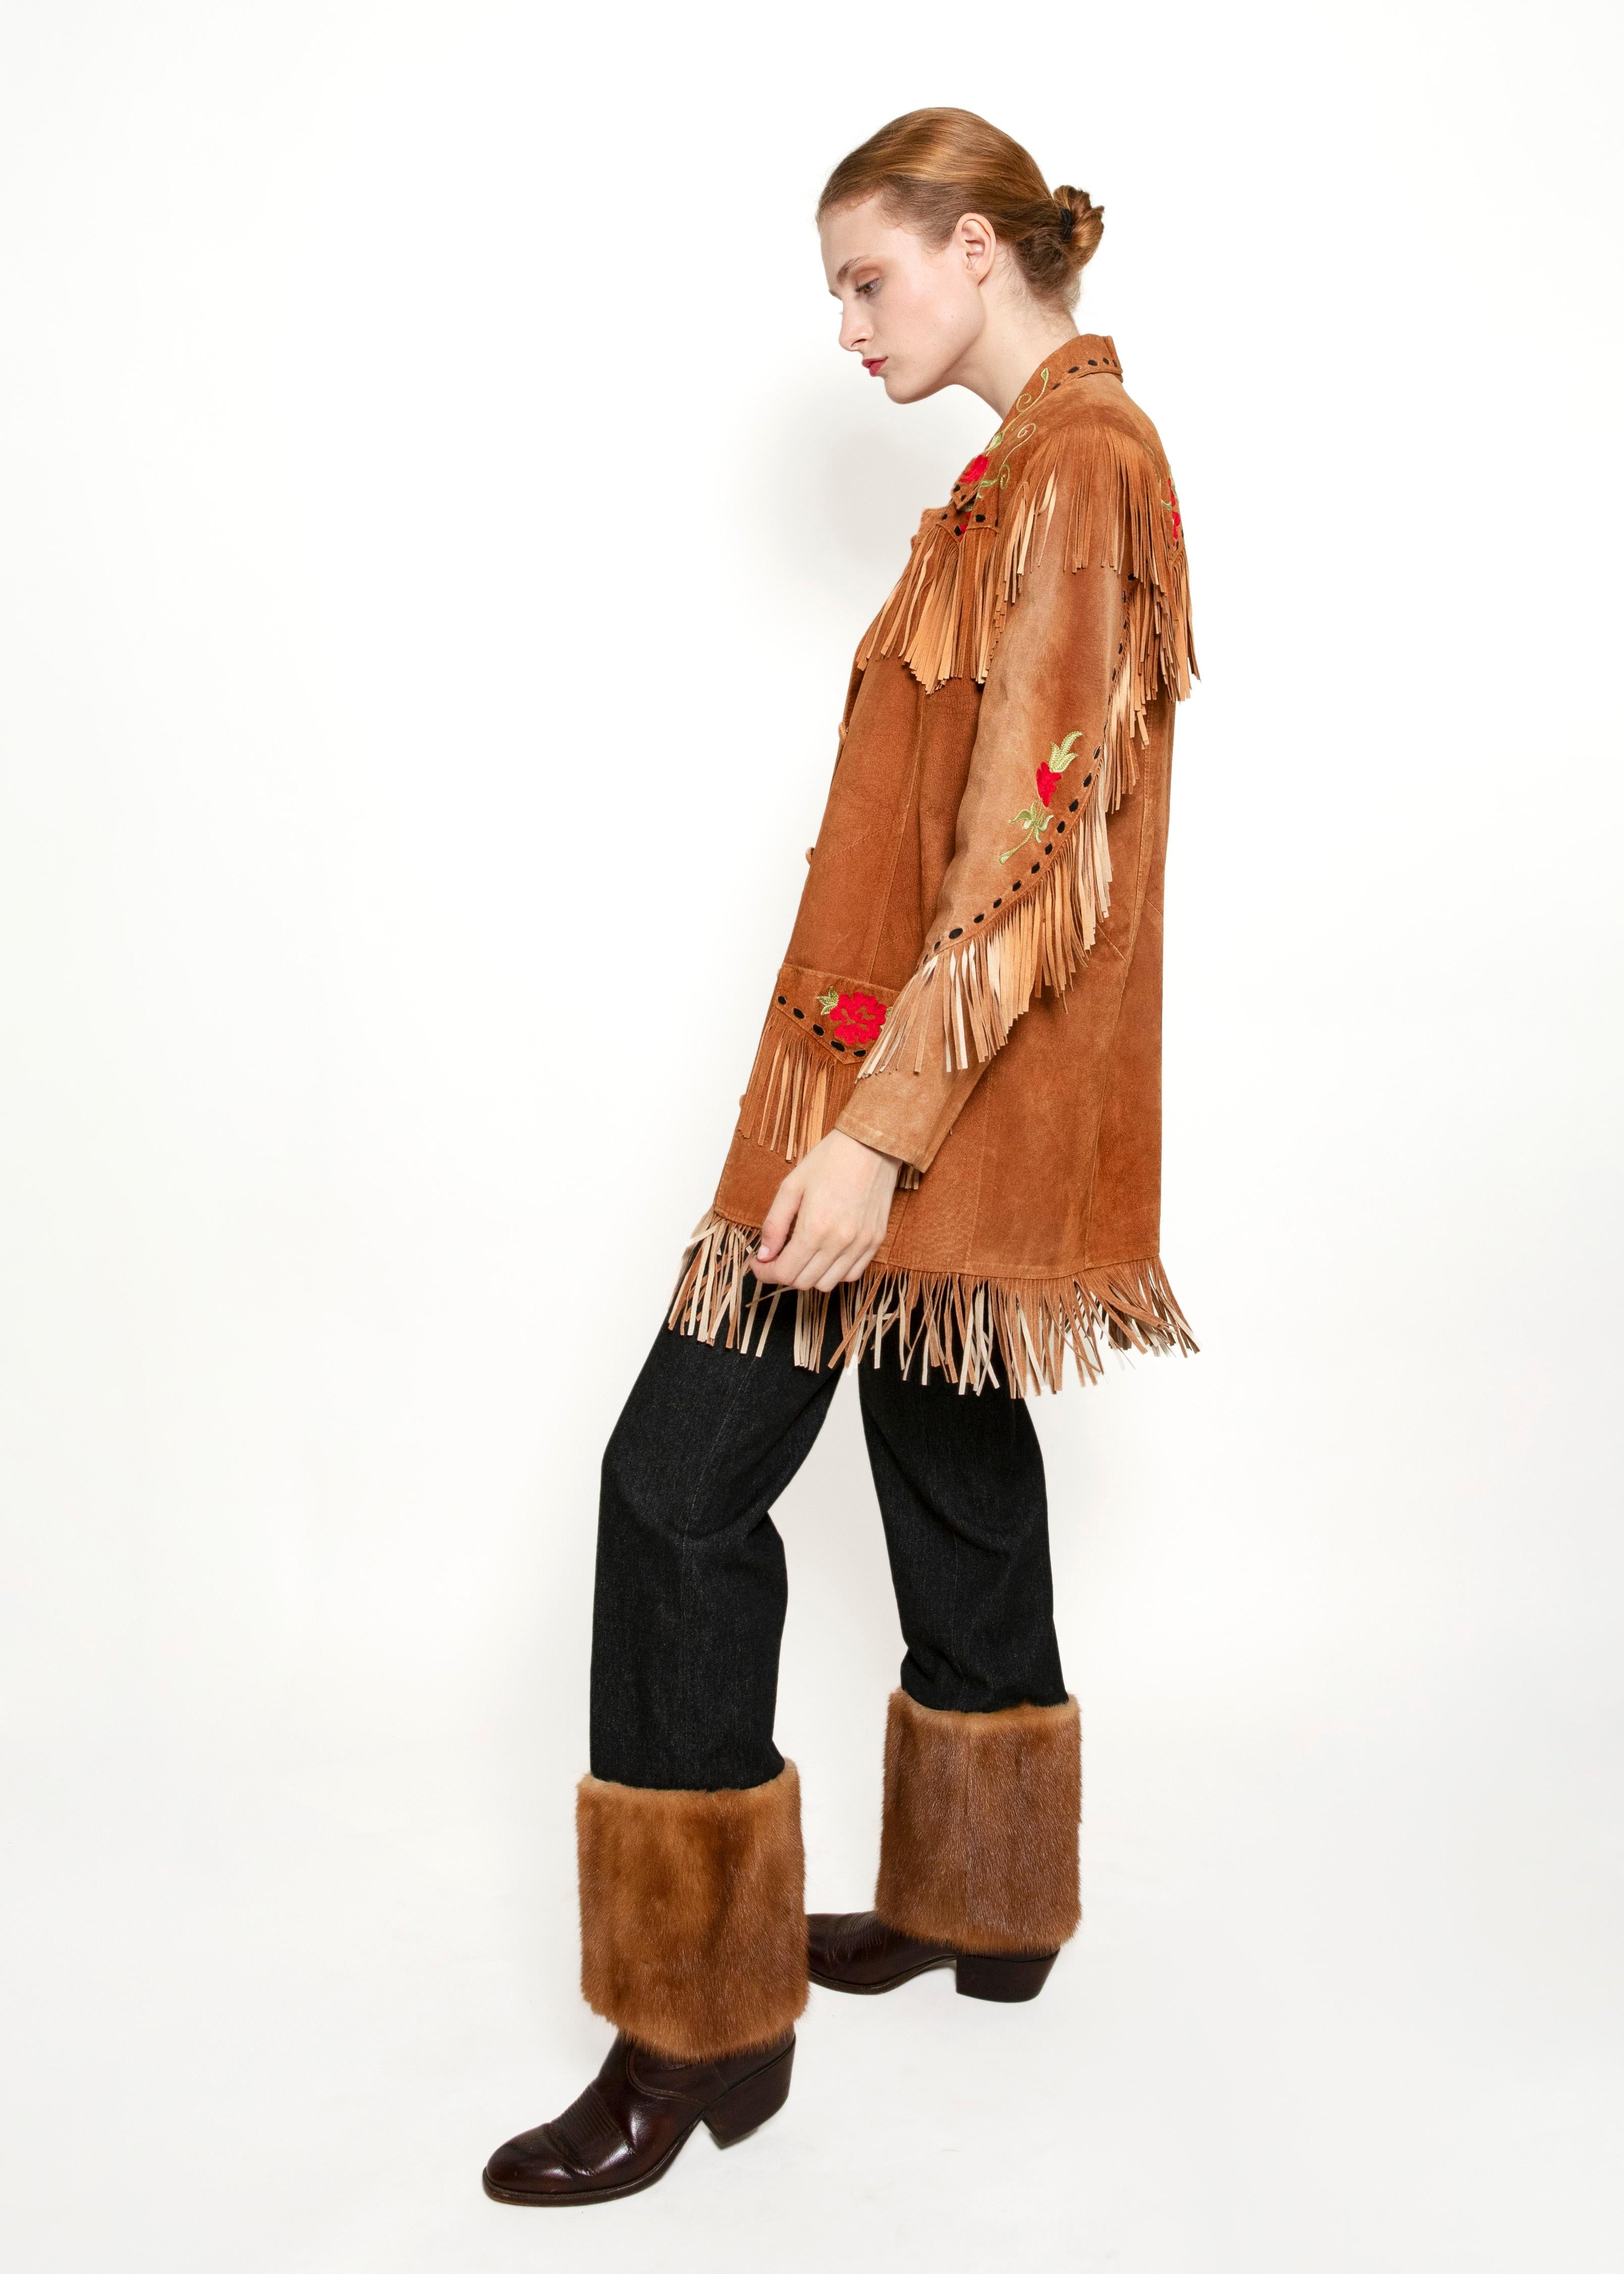 Embrace the wild west with our Suede Fringe & Embroidered Jacket! With its vintage embroidered floral pattern and western fringe, this jacket will add a daring edge to your outfit. Take a risk, make a statement, and stand out from the